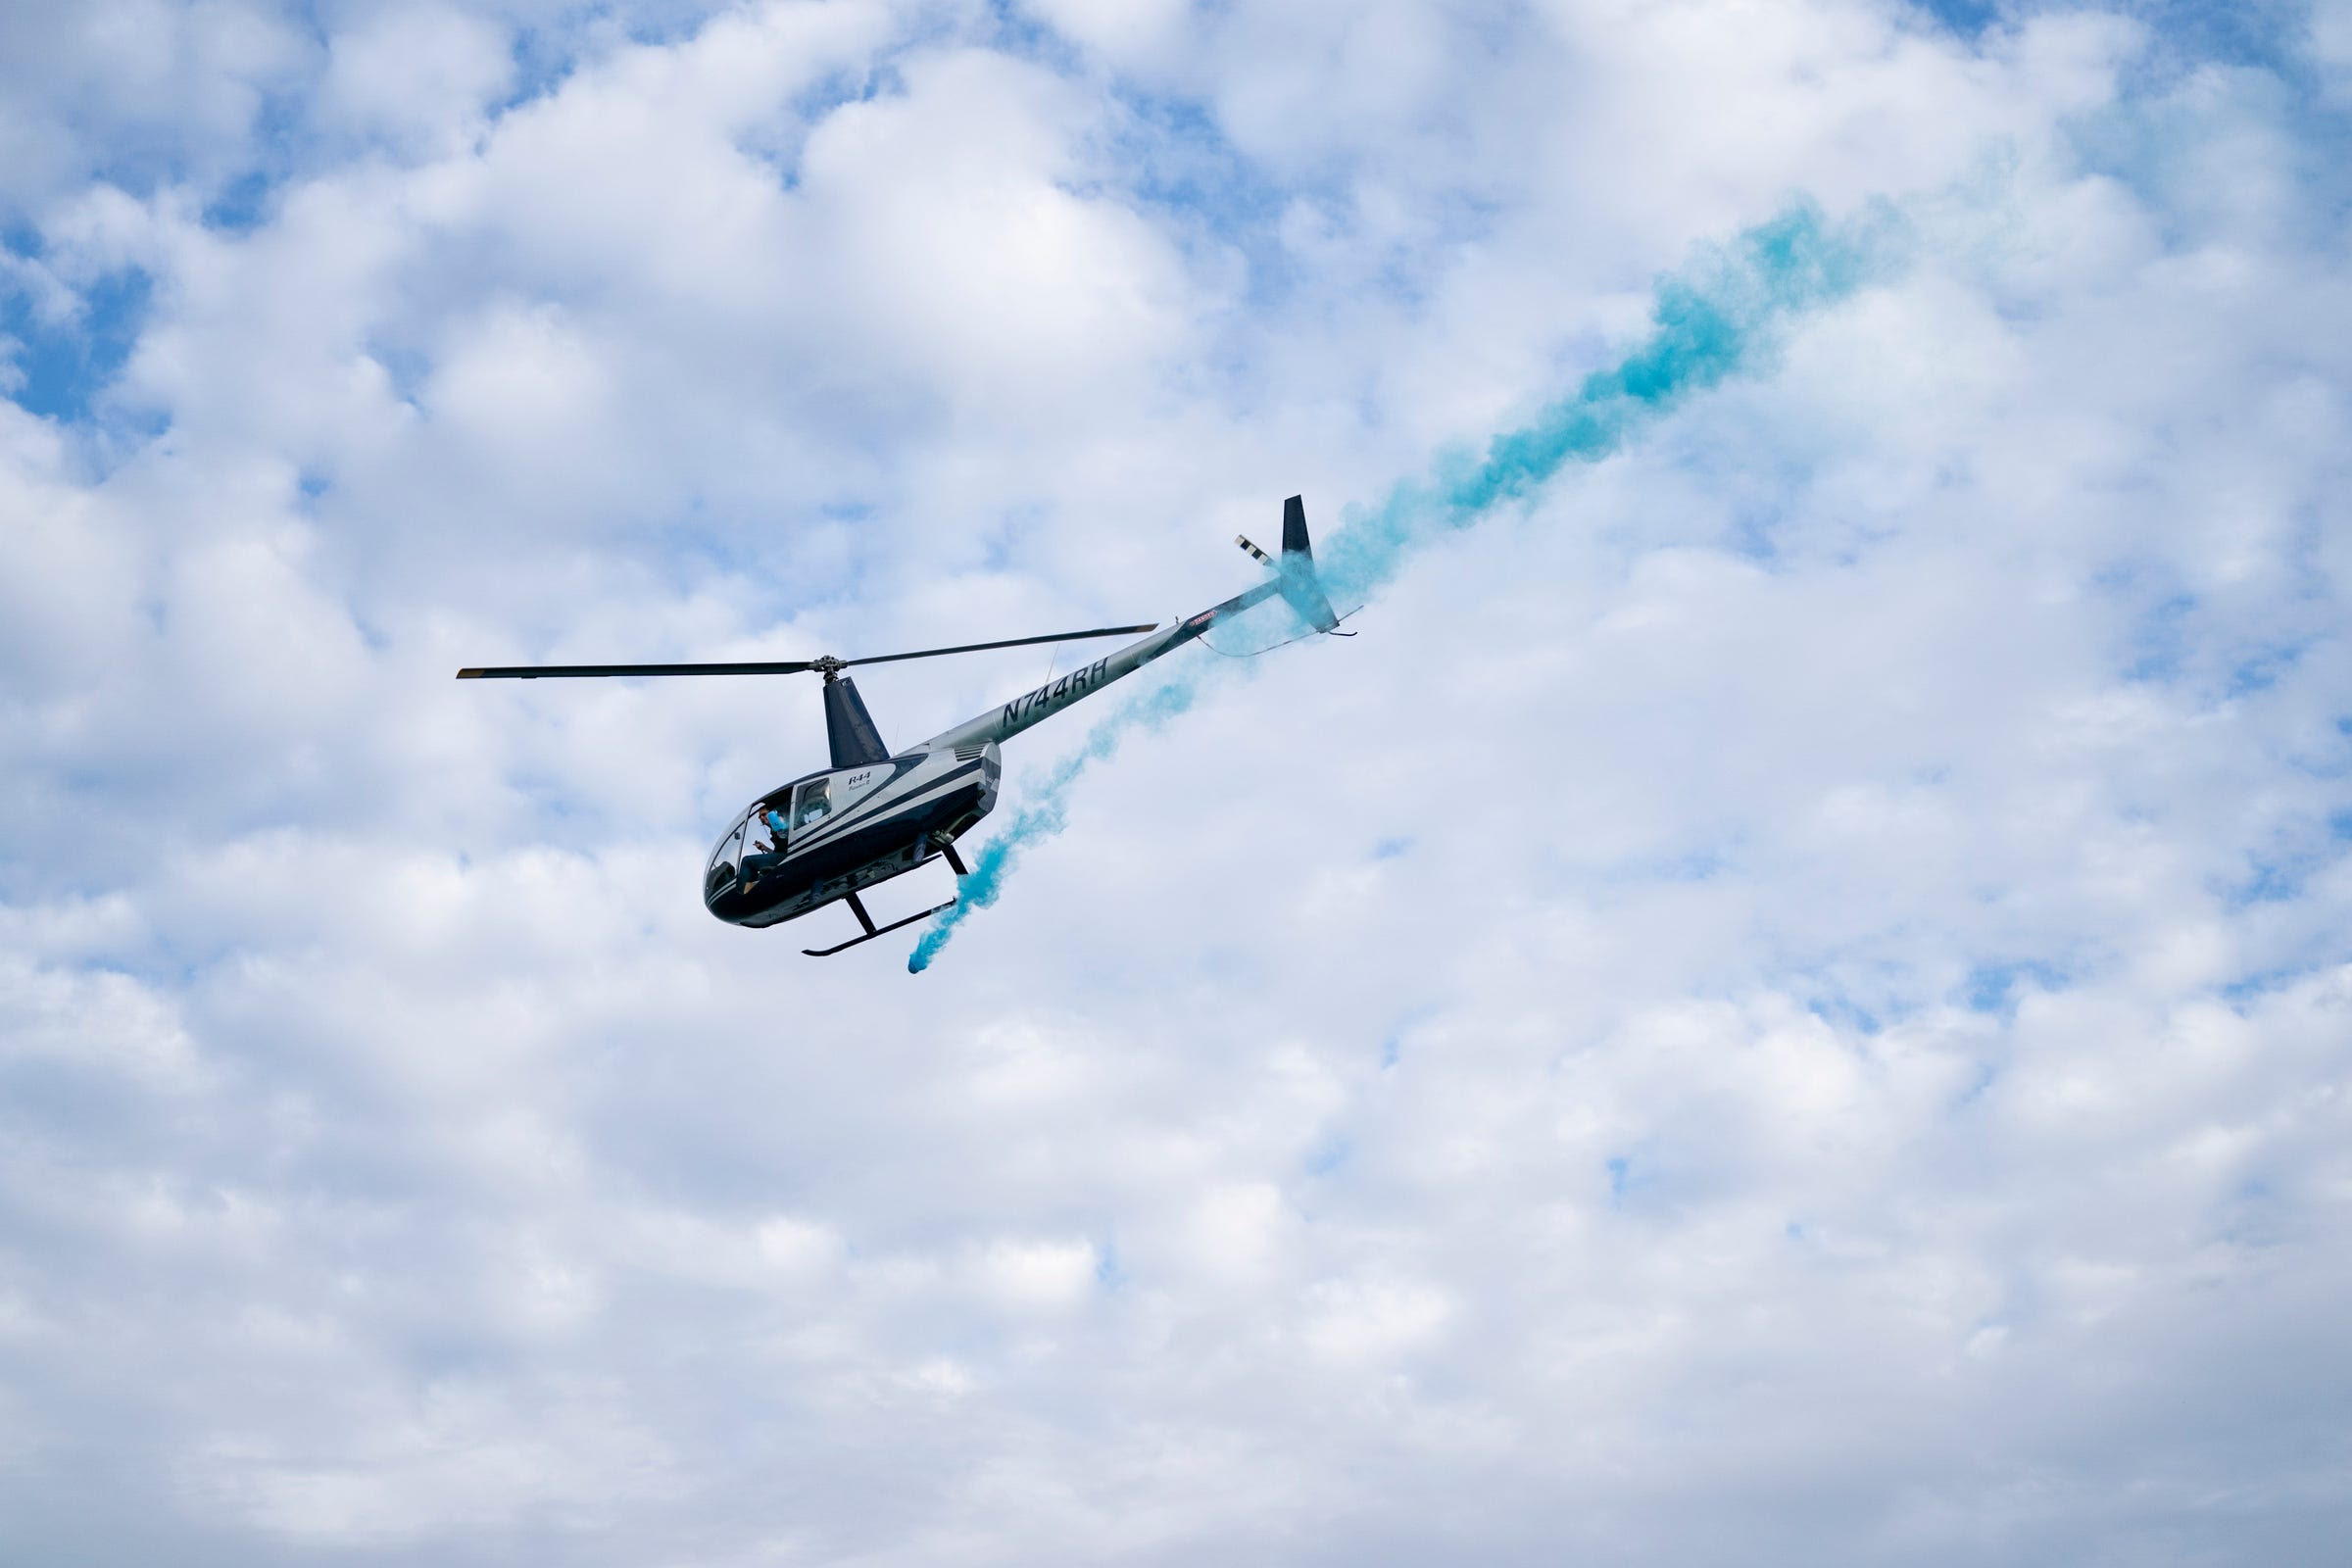 Max Flight Helicopter Services releases a blue powder over the Detroit River as part of a gender reveal party organized by Drew Roberts and Chi Chi Dean for their first child.  The two, along with some friends, took a chartered power boat through Riverwise Detroit Boat Tours out of the Grayhaven State Harbor for the gender reveal.